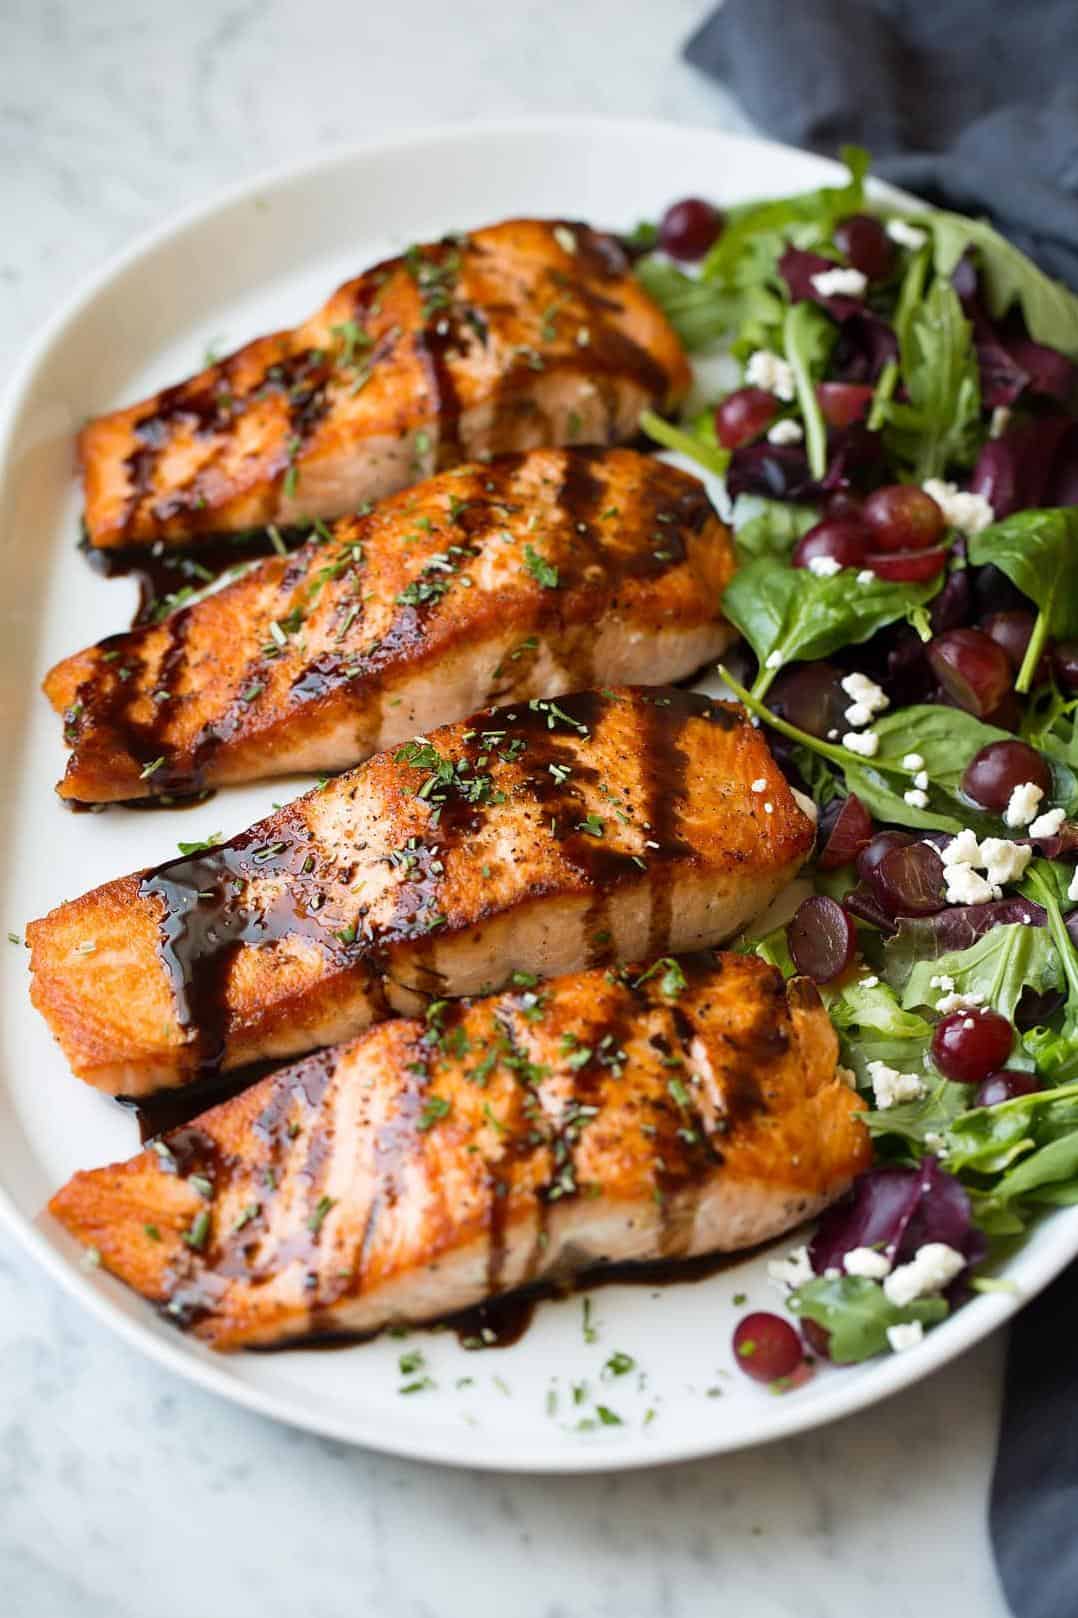  Perfectly caramelized and coated in tangy balsamic glaze, this salmon will have you coming back for seconds.